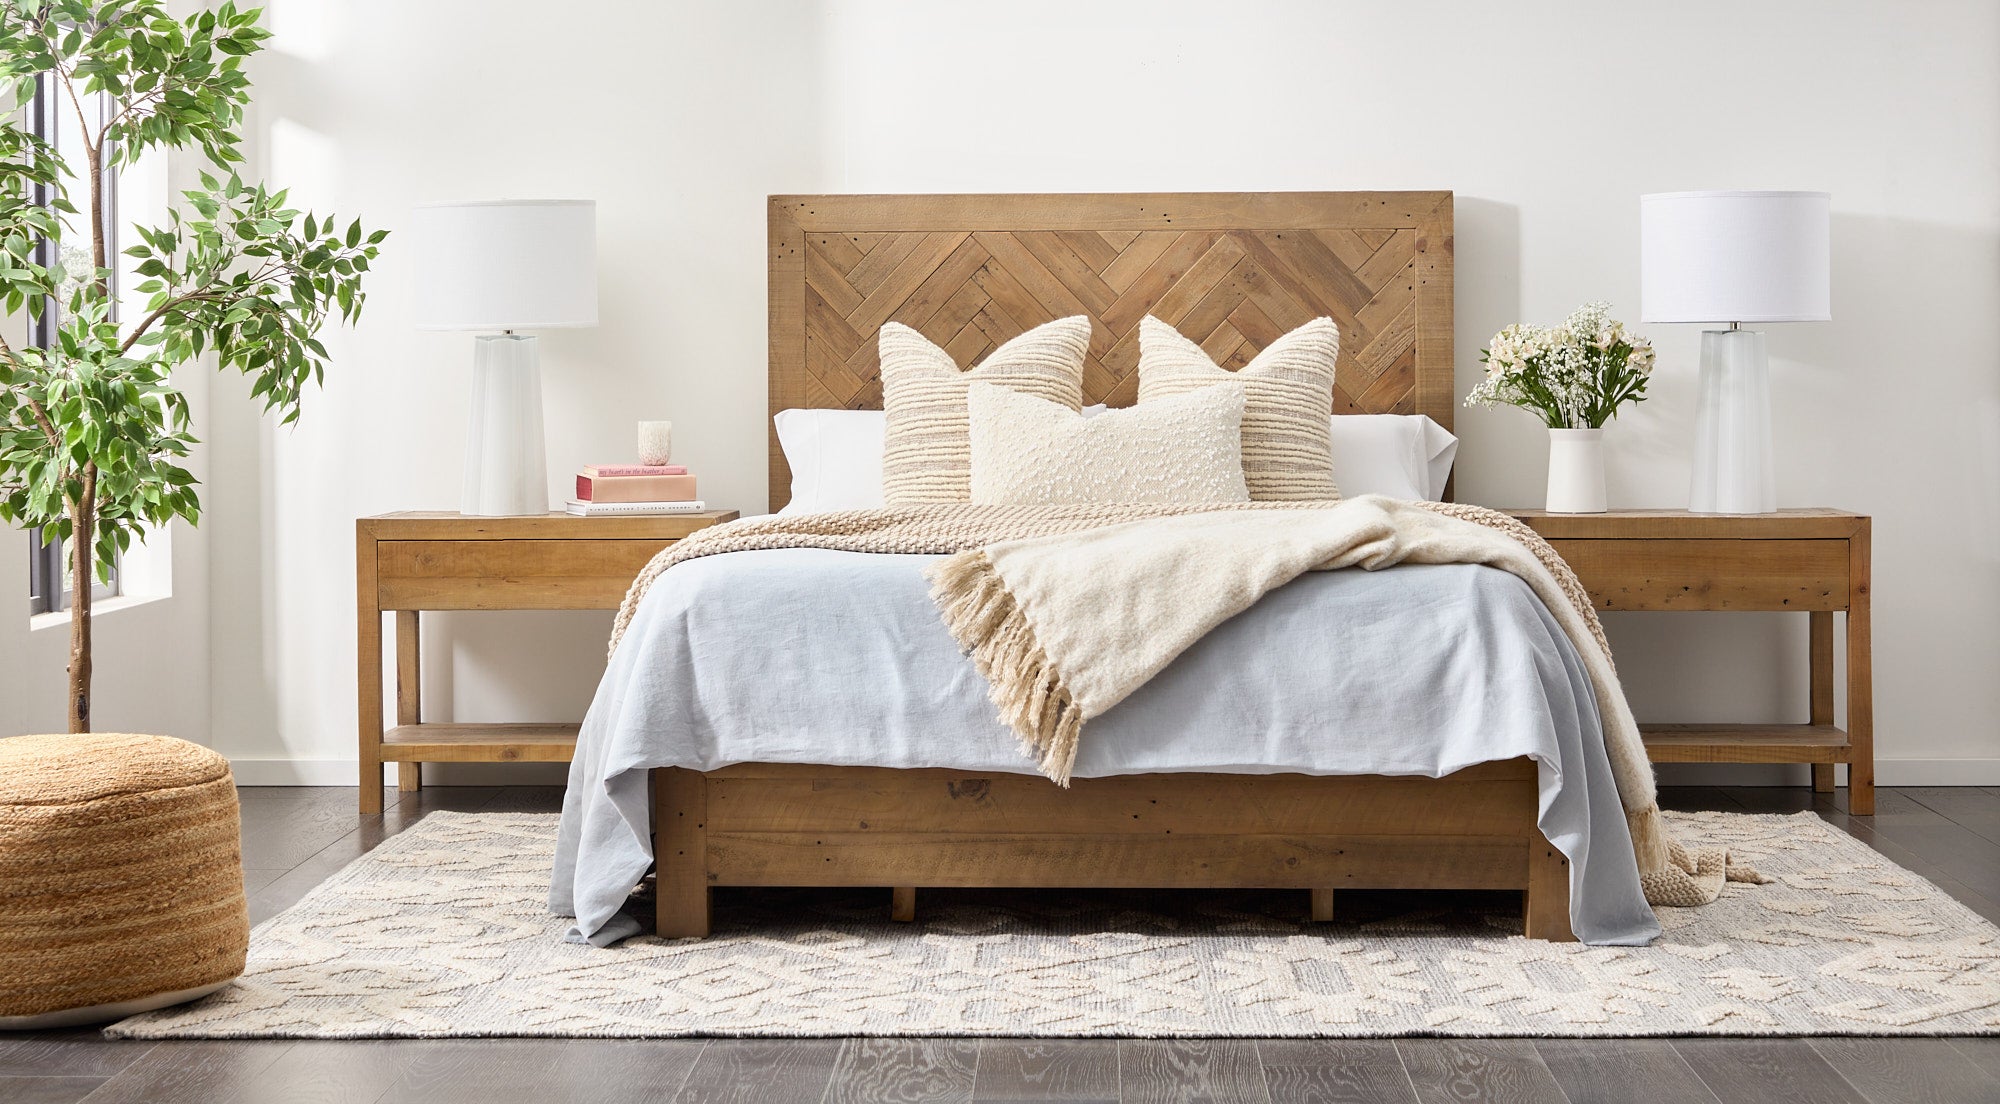 Get Ready for Summer with a Bedroom Refresh from Downeast Home